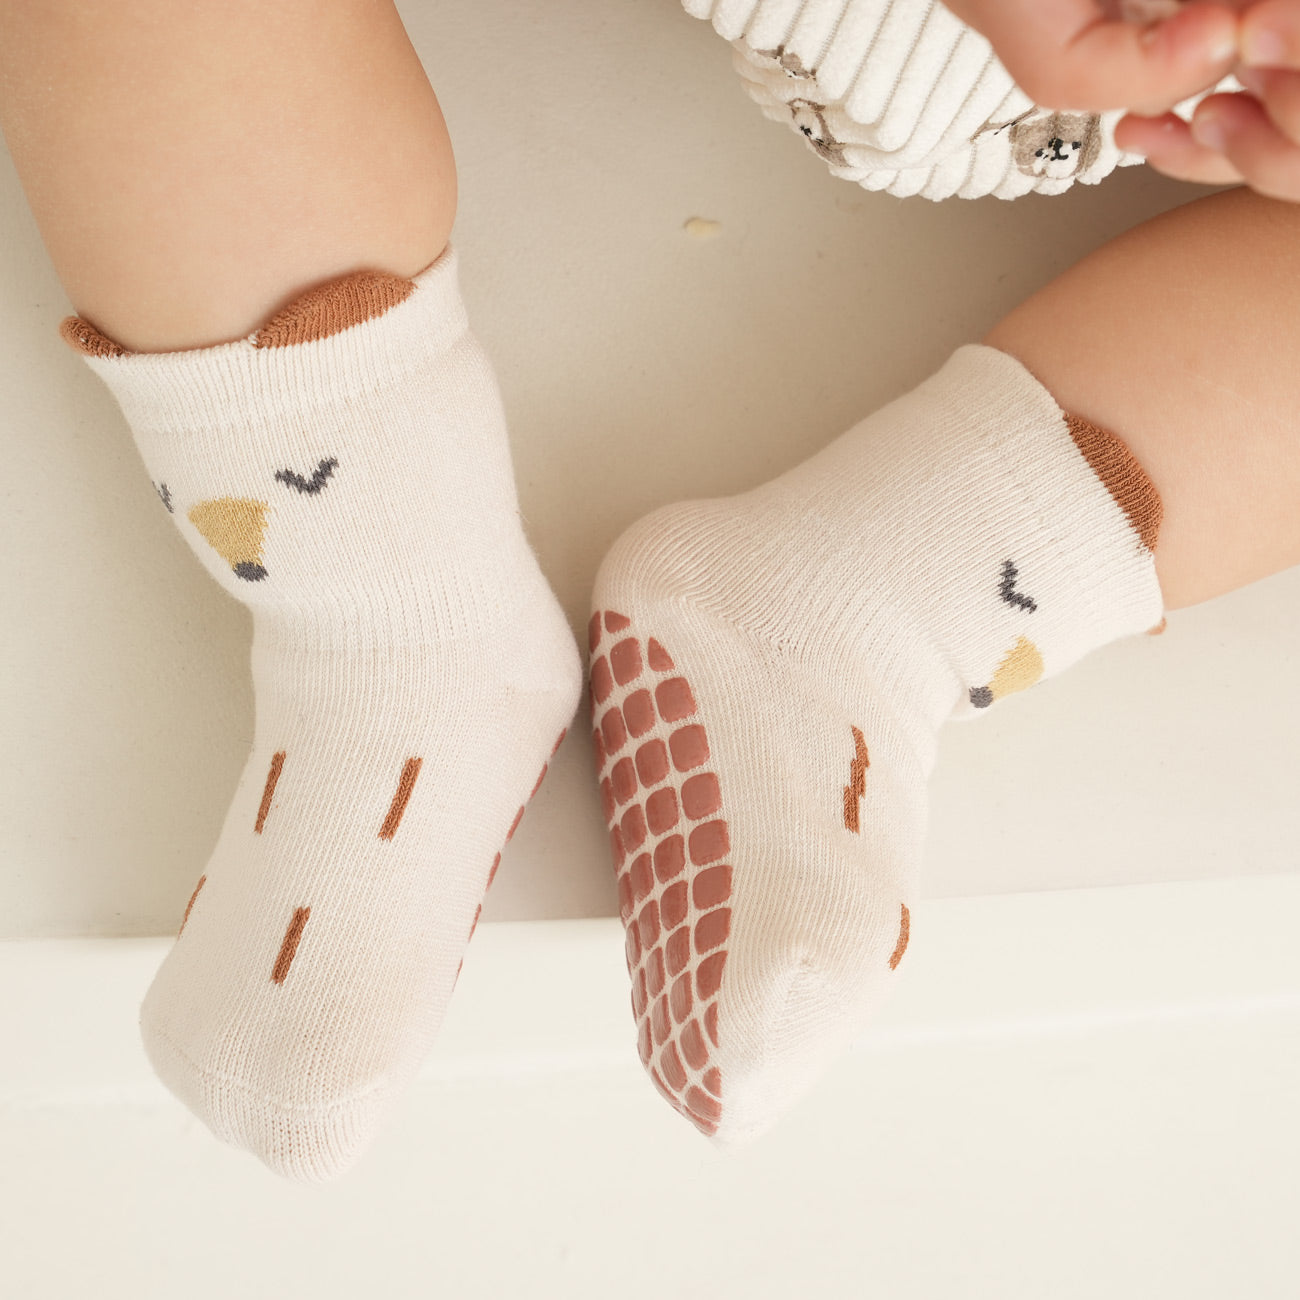 Fox life - 4 Pairs of Stay-On Baby & Toddler Non-Slip Socks